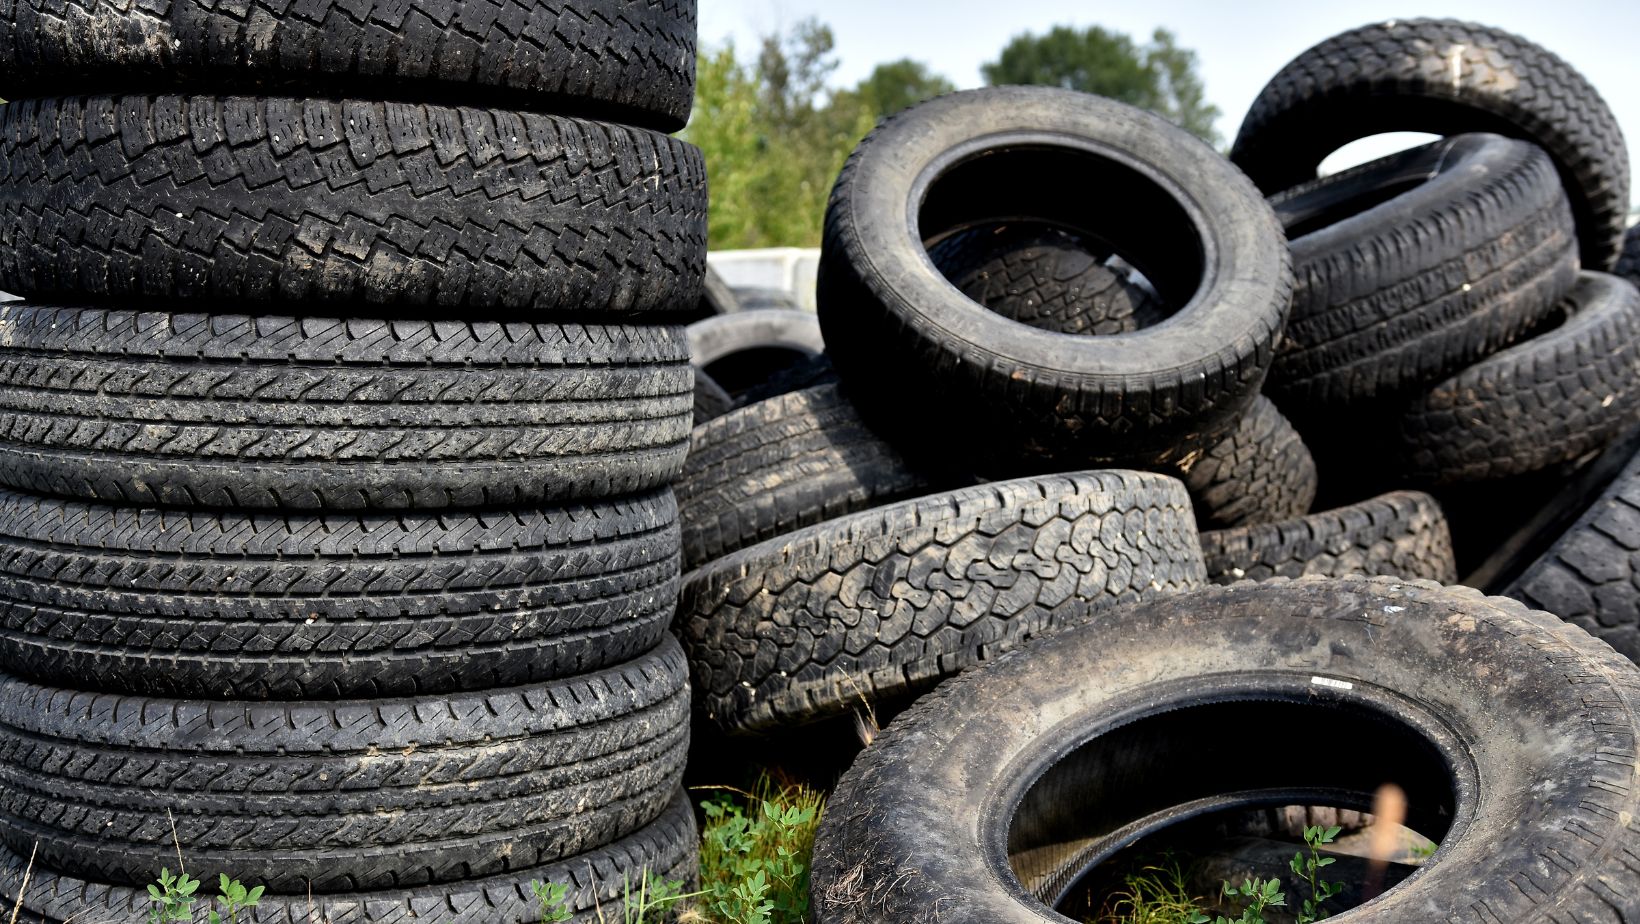 tires are not recyclable if they are damaged